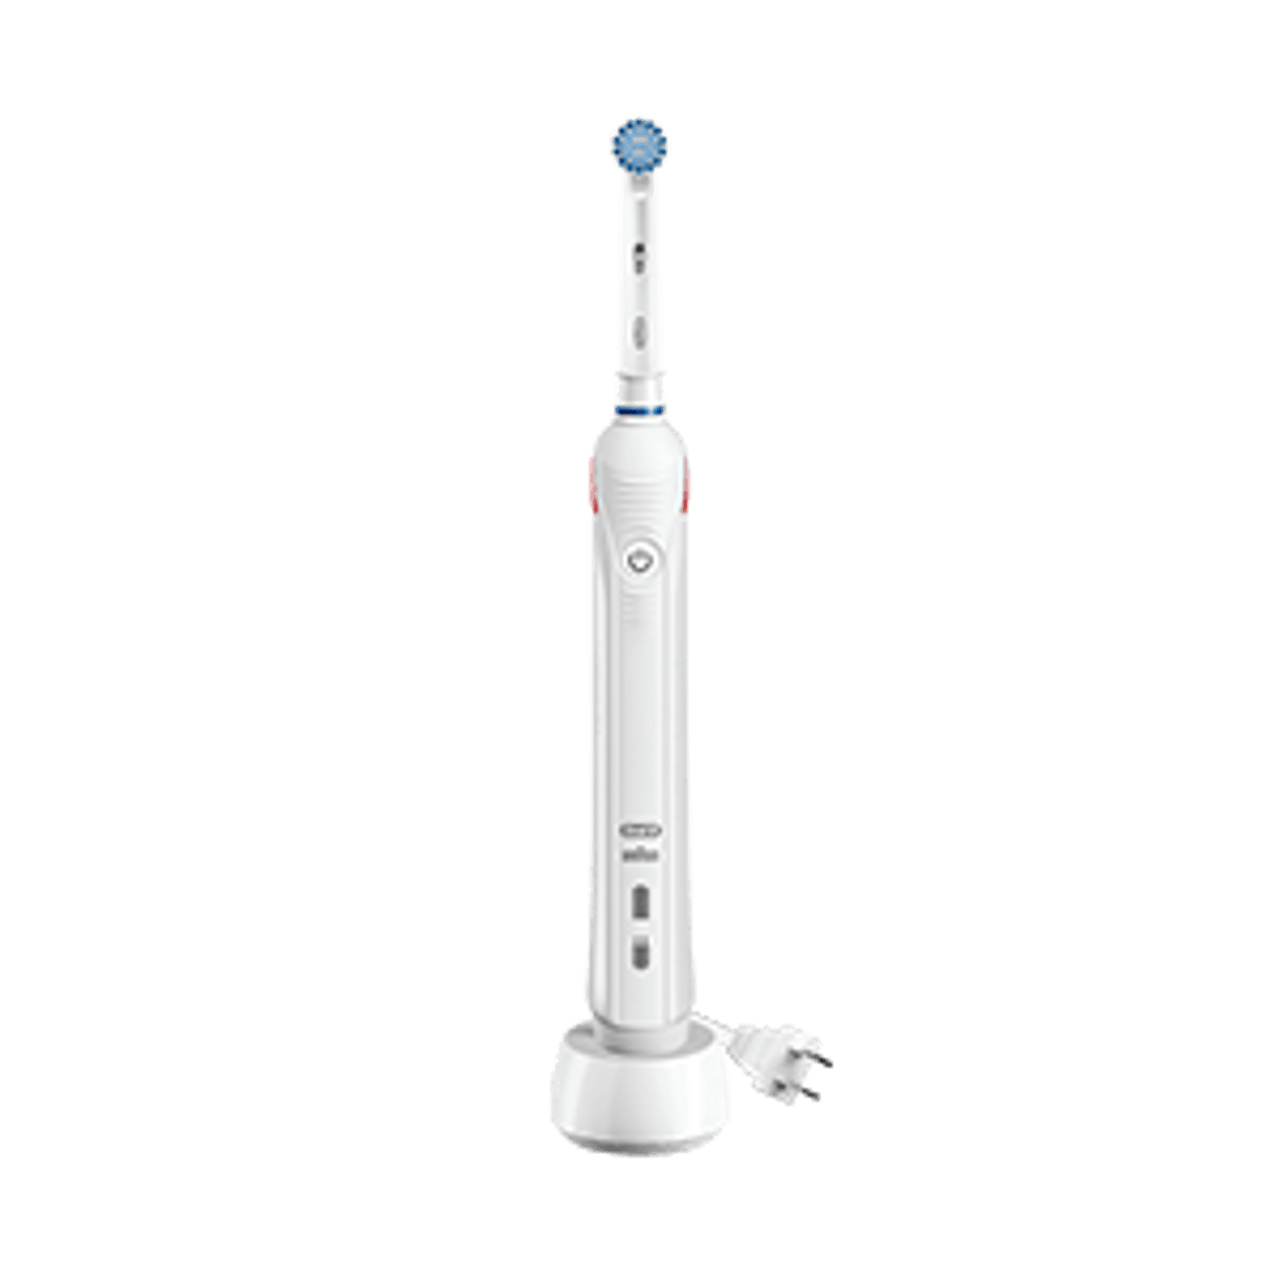 Oral-b Io Electric Toothbrush - Best Electric Toothbrush